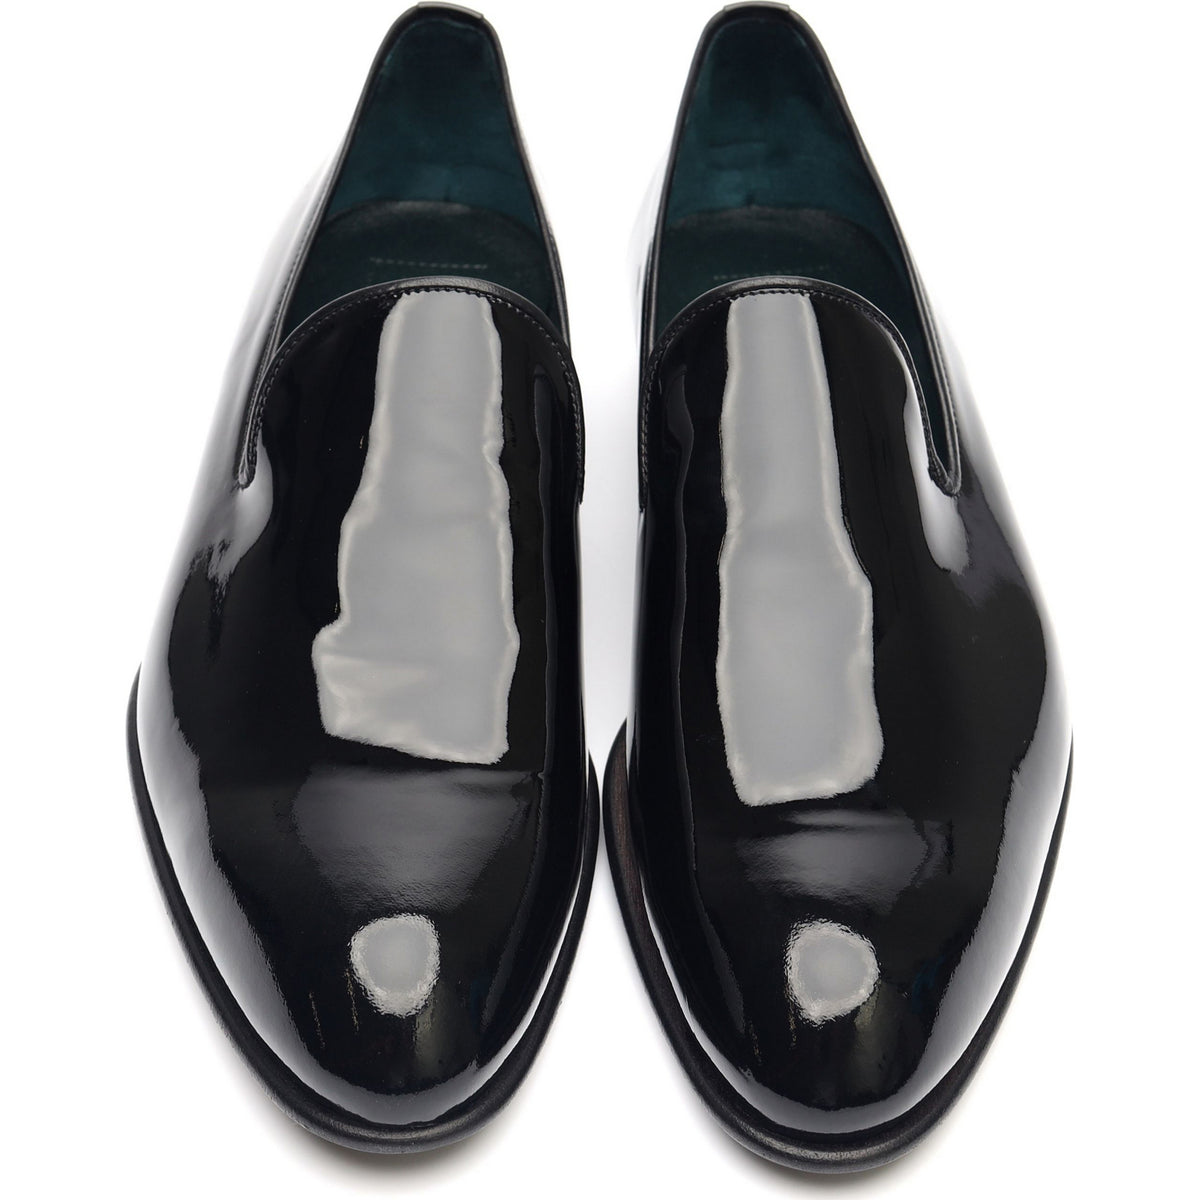 Black Patent Leather Evening Loafers UK 7.5